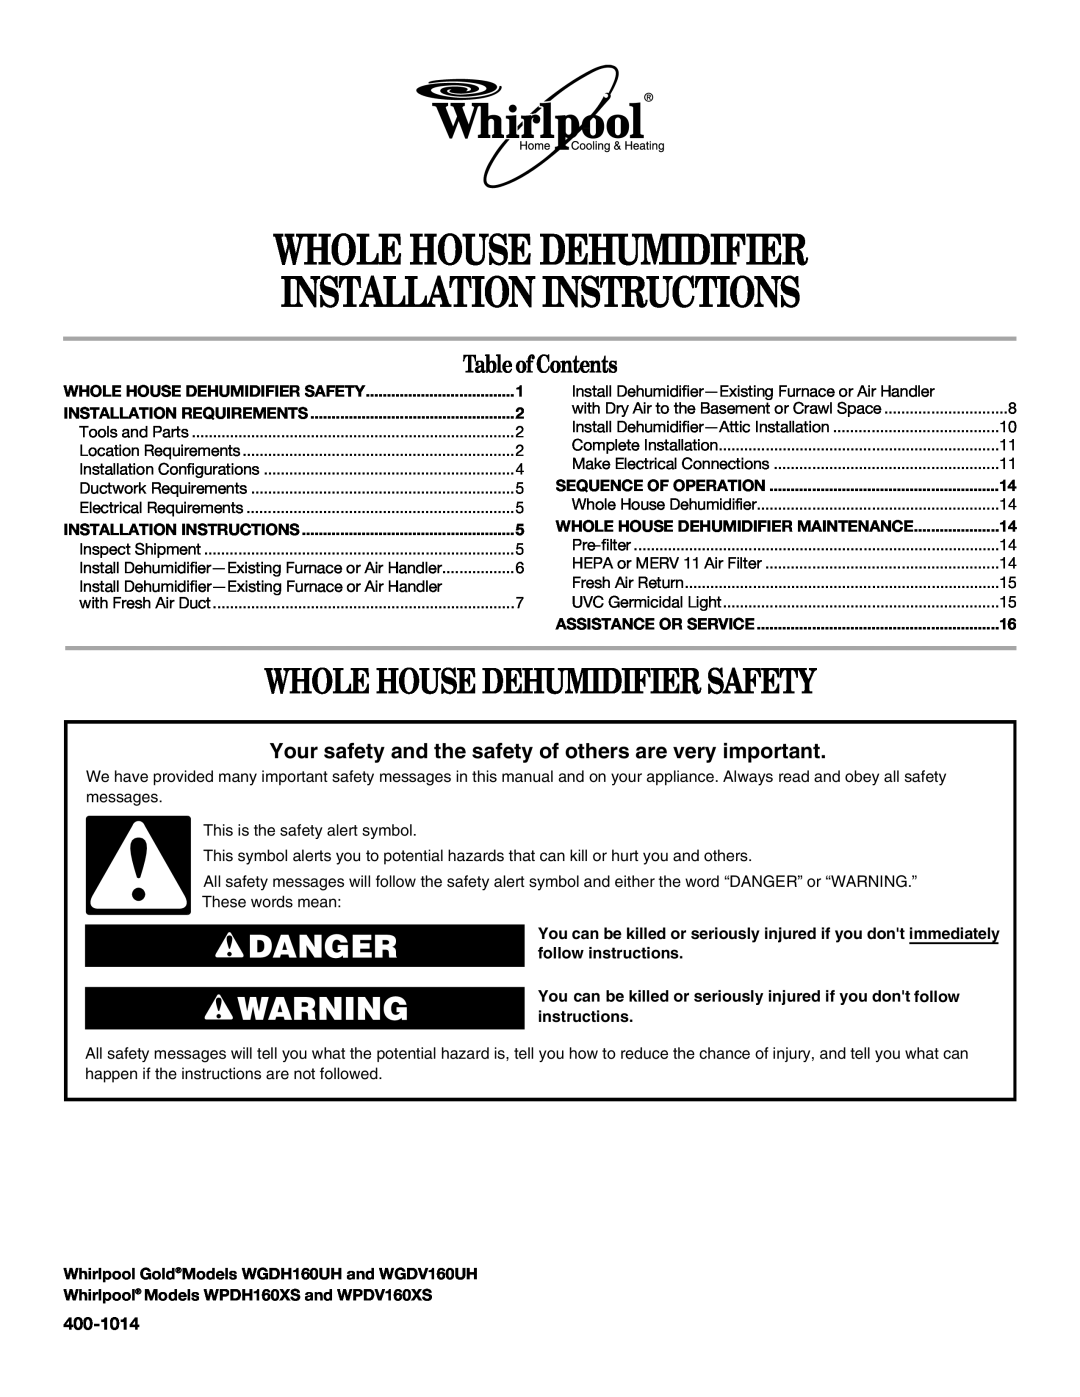 Whirlpool WPDV160XS installation instructions Whole House Dehumidifier Safety, 400-1014, Danger, TableofContents 